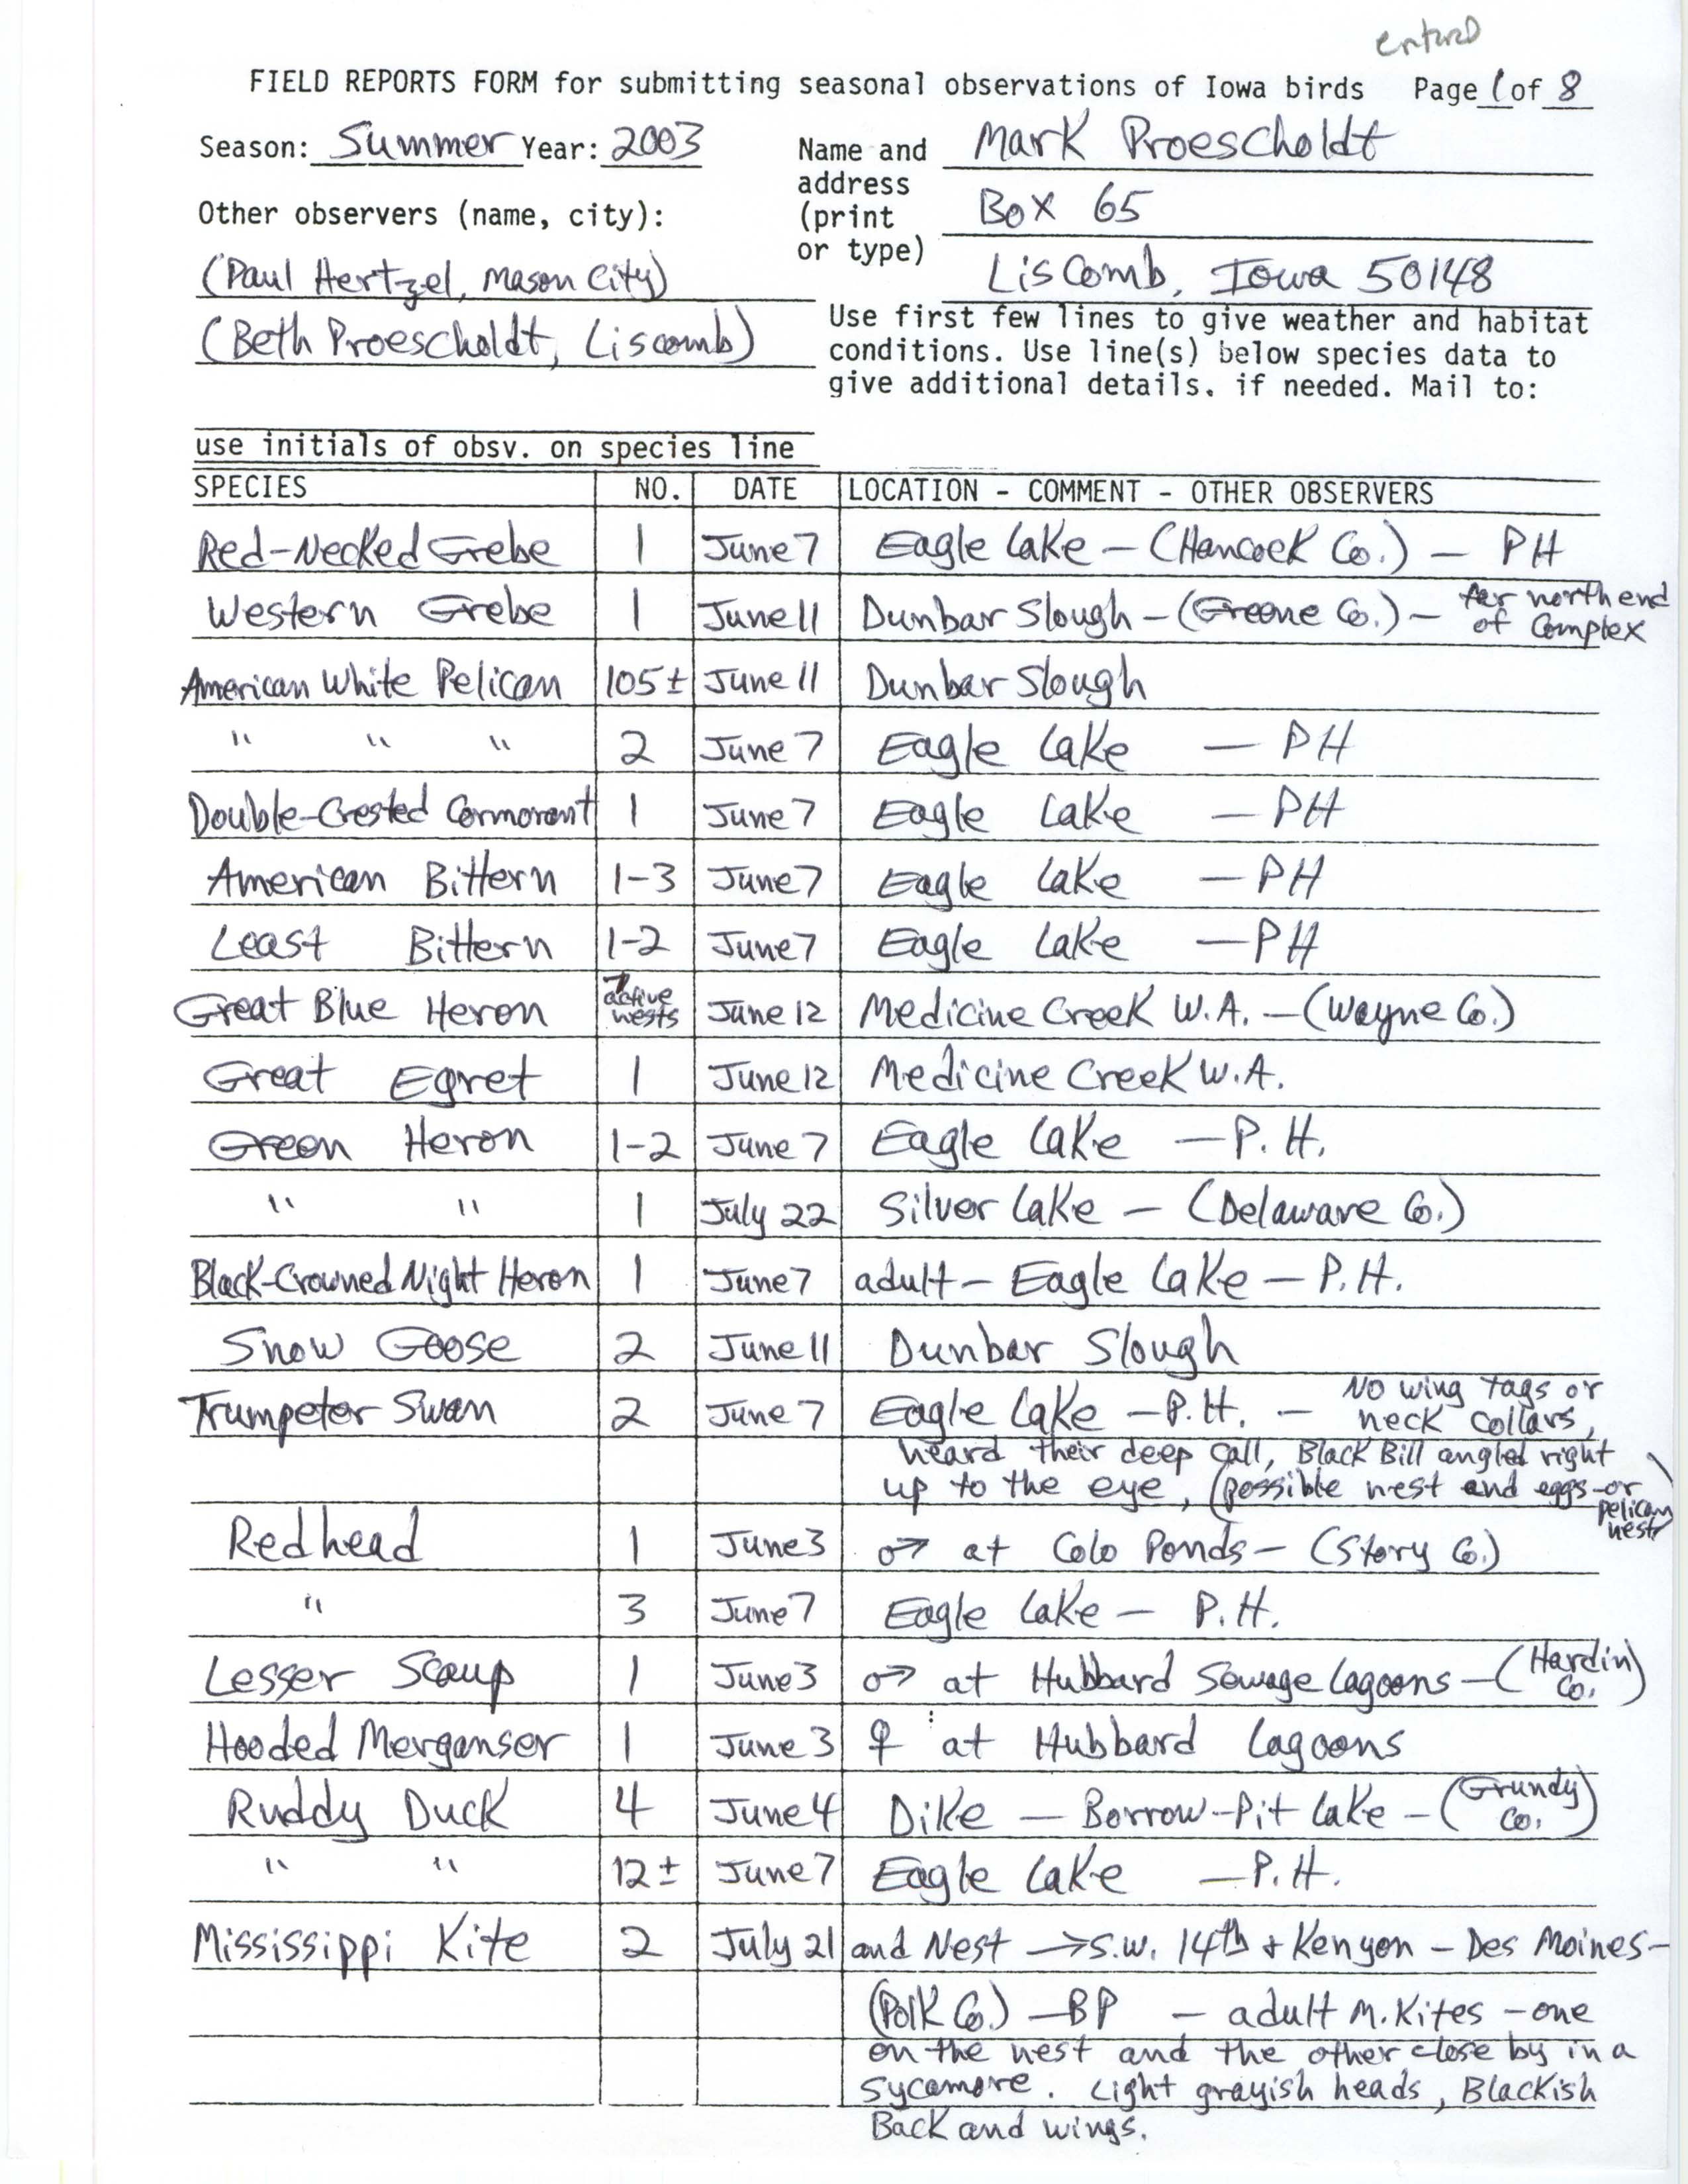 Field reports form for submitting seasonal observations of Iowa birds, Mark Proescholdt, summer 2003